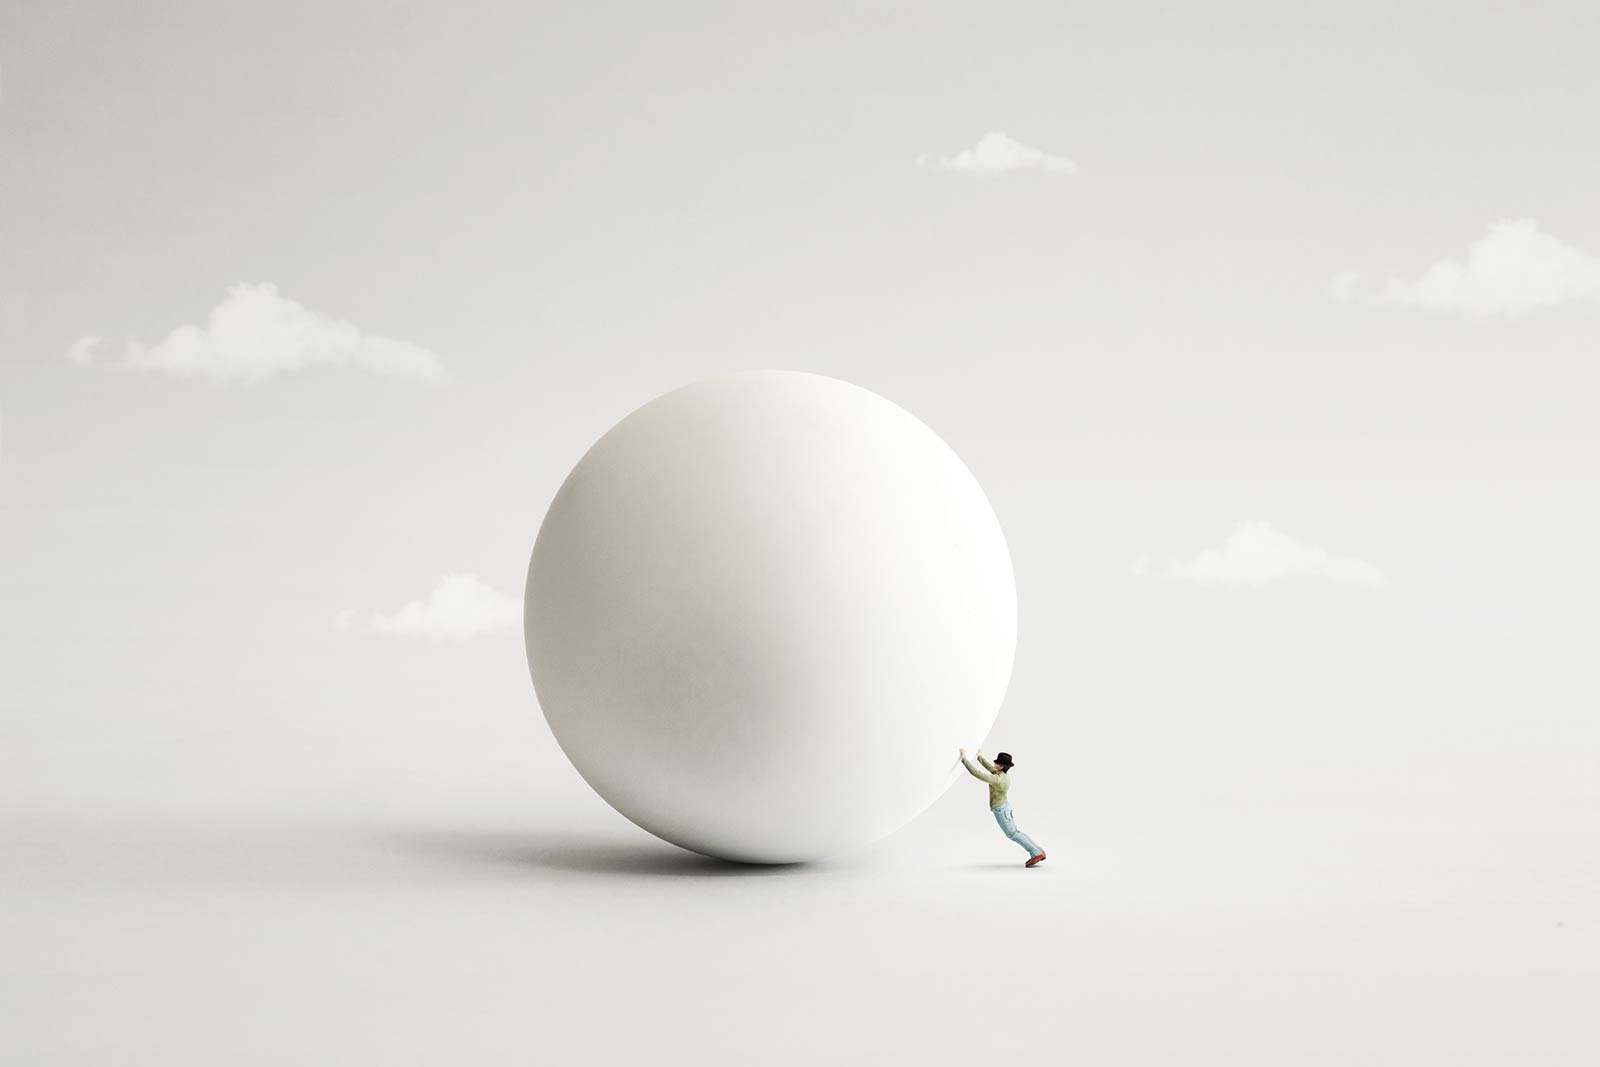 Surreal image of a small man attempting to push a large white ball on a grey surface with illustrative clouds in the background